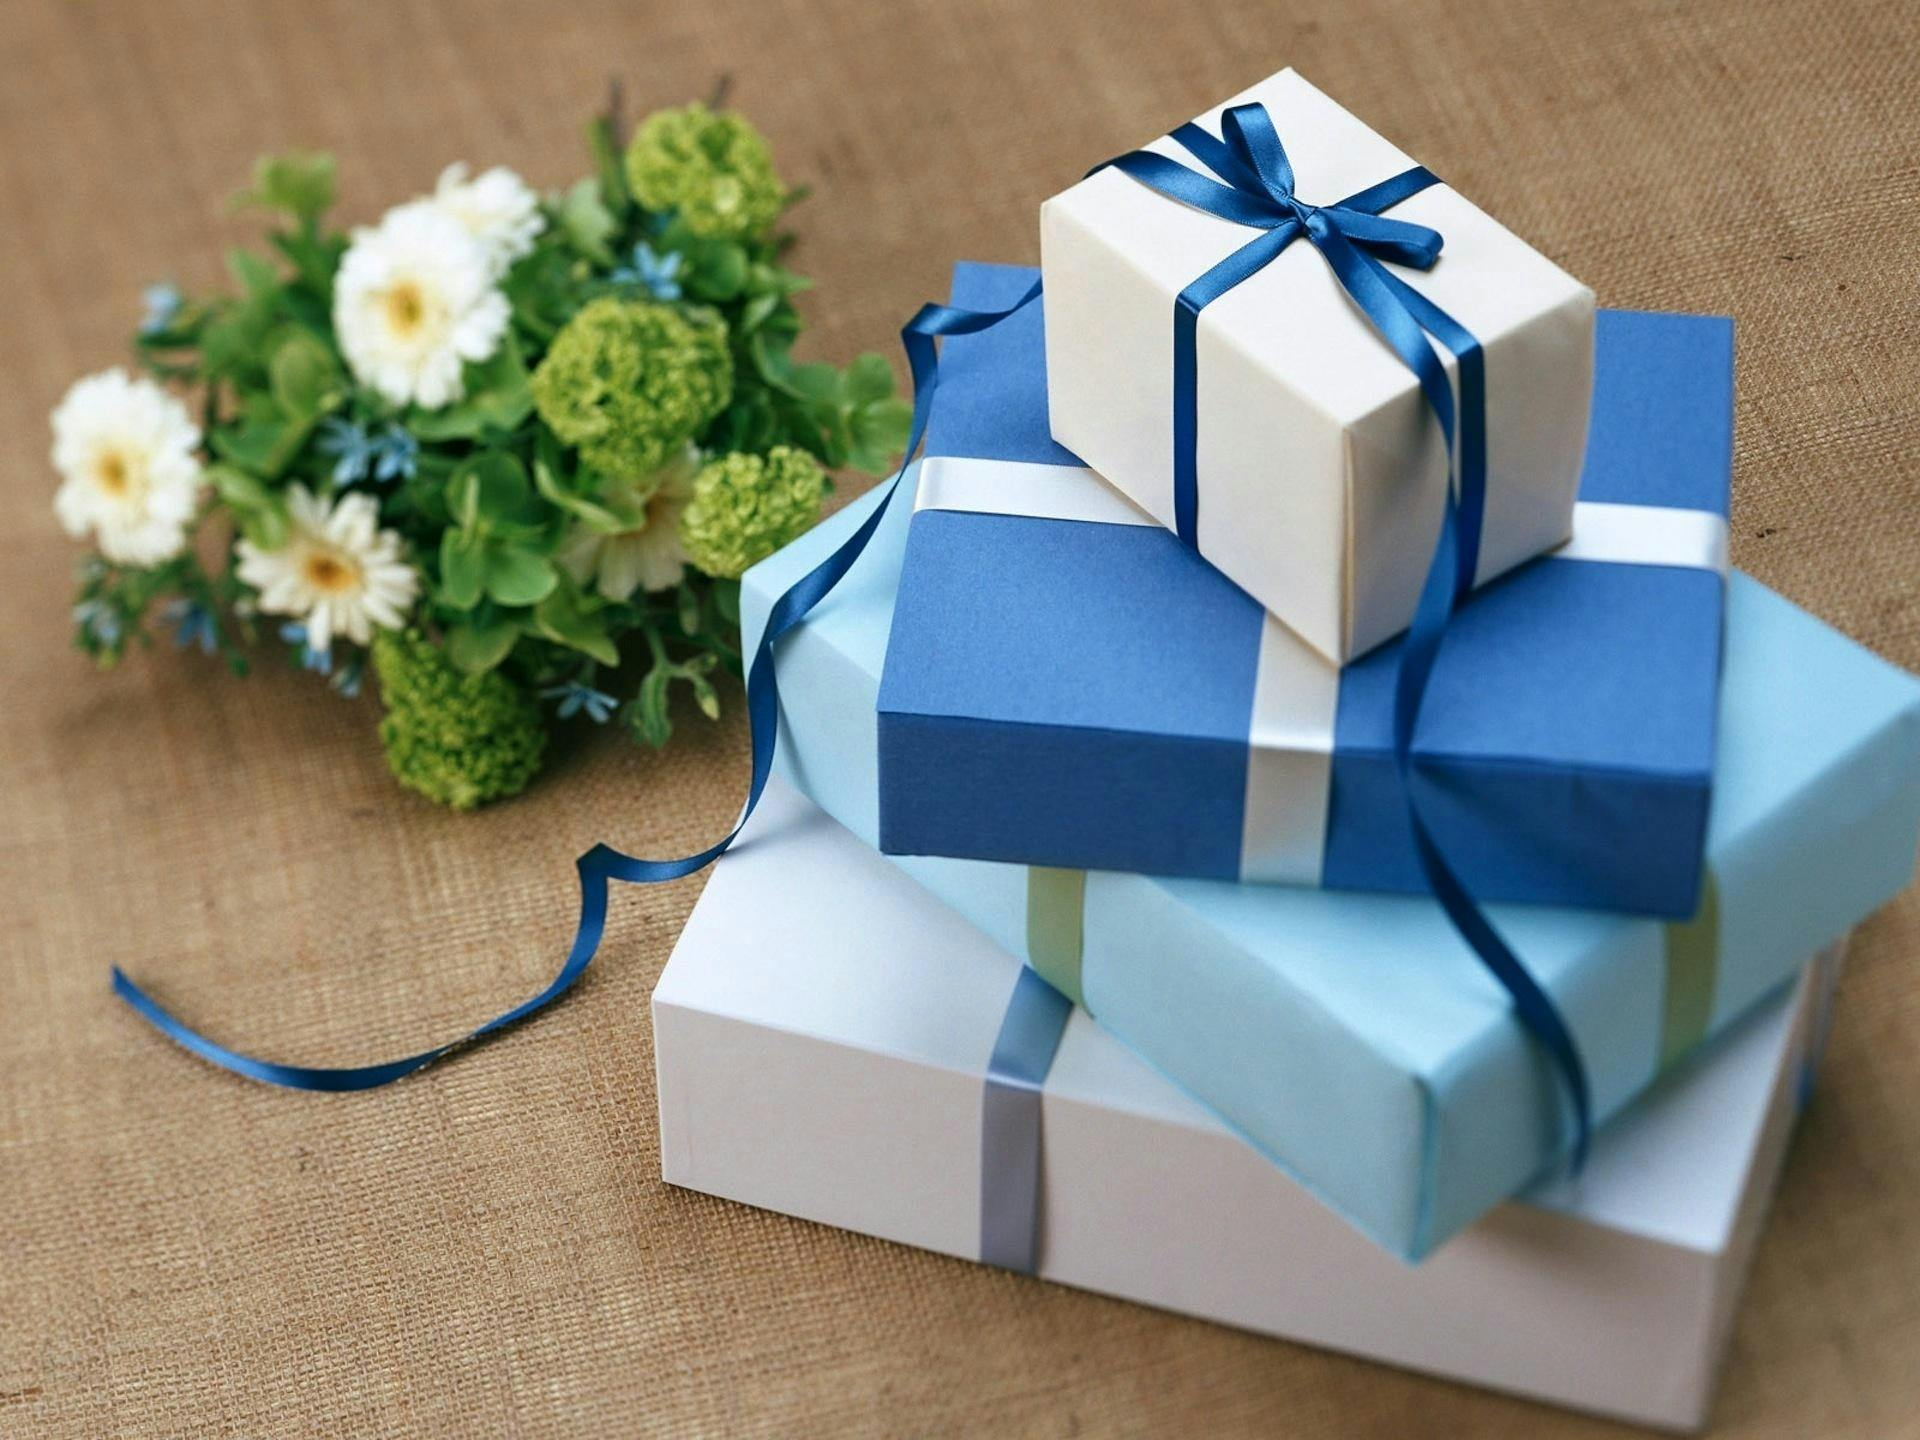 Stack of blue wedding gift boxes on a table next to a white flower arrangement